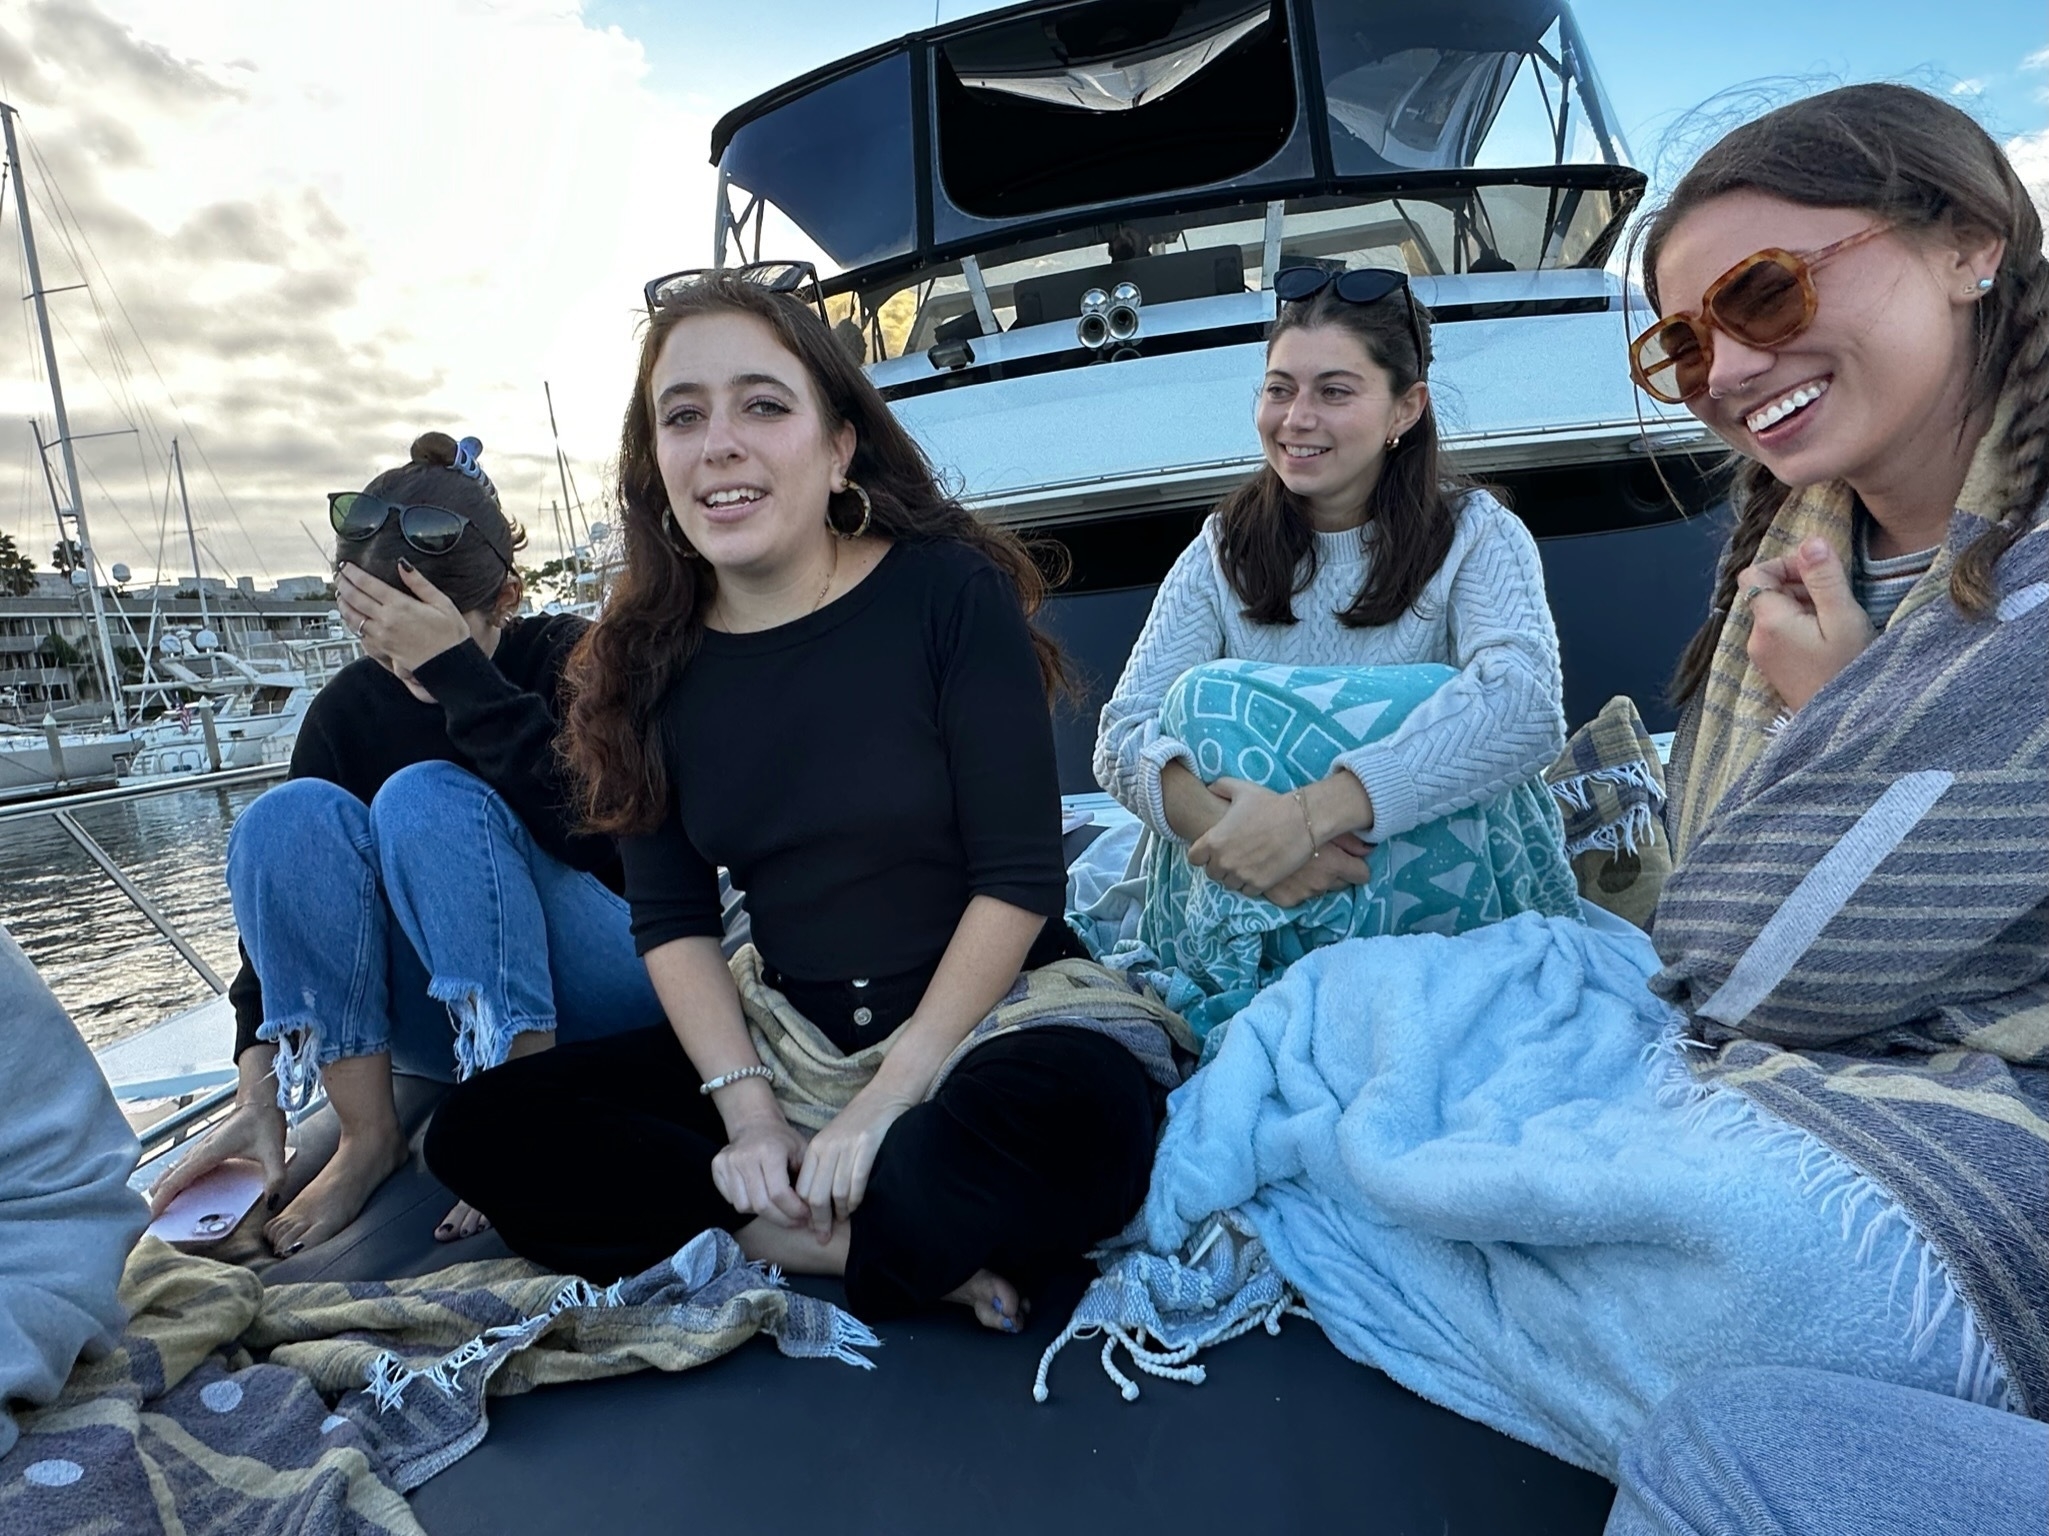 The author and her friends on a boat